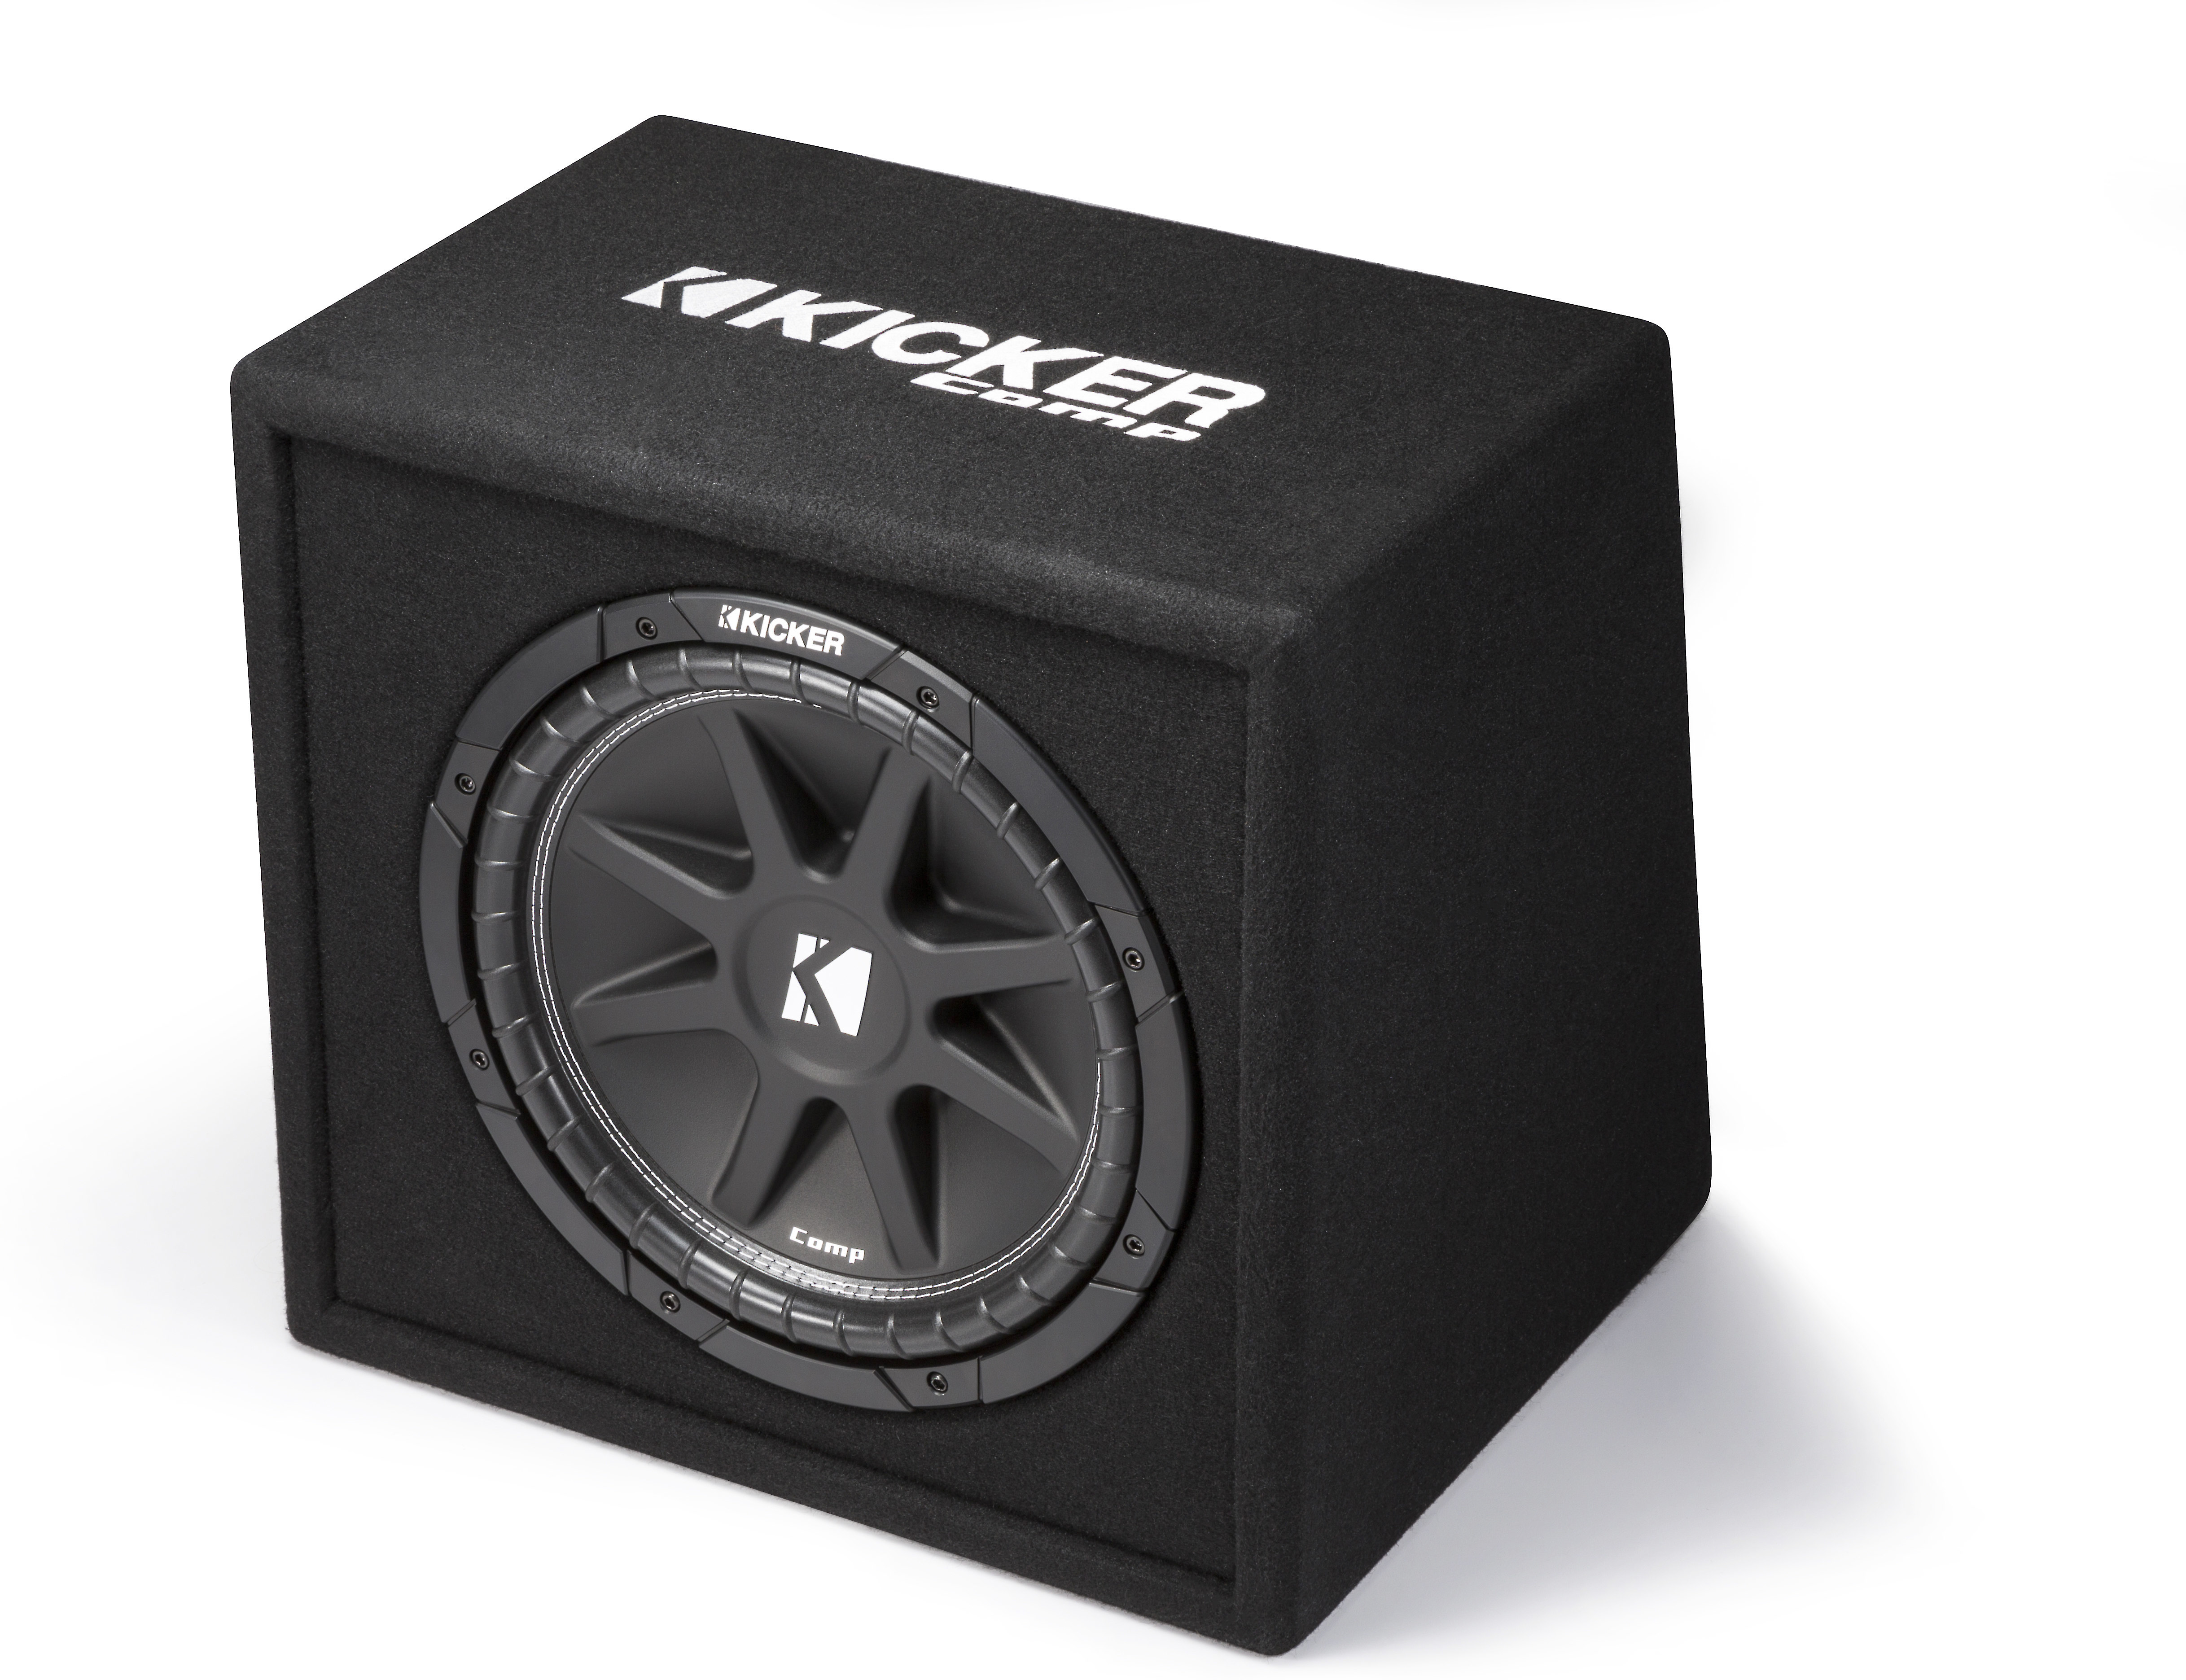 Kicker 43VC124 Ported enclosure with 12 